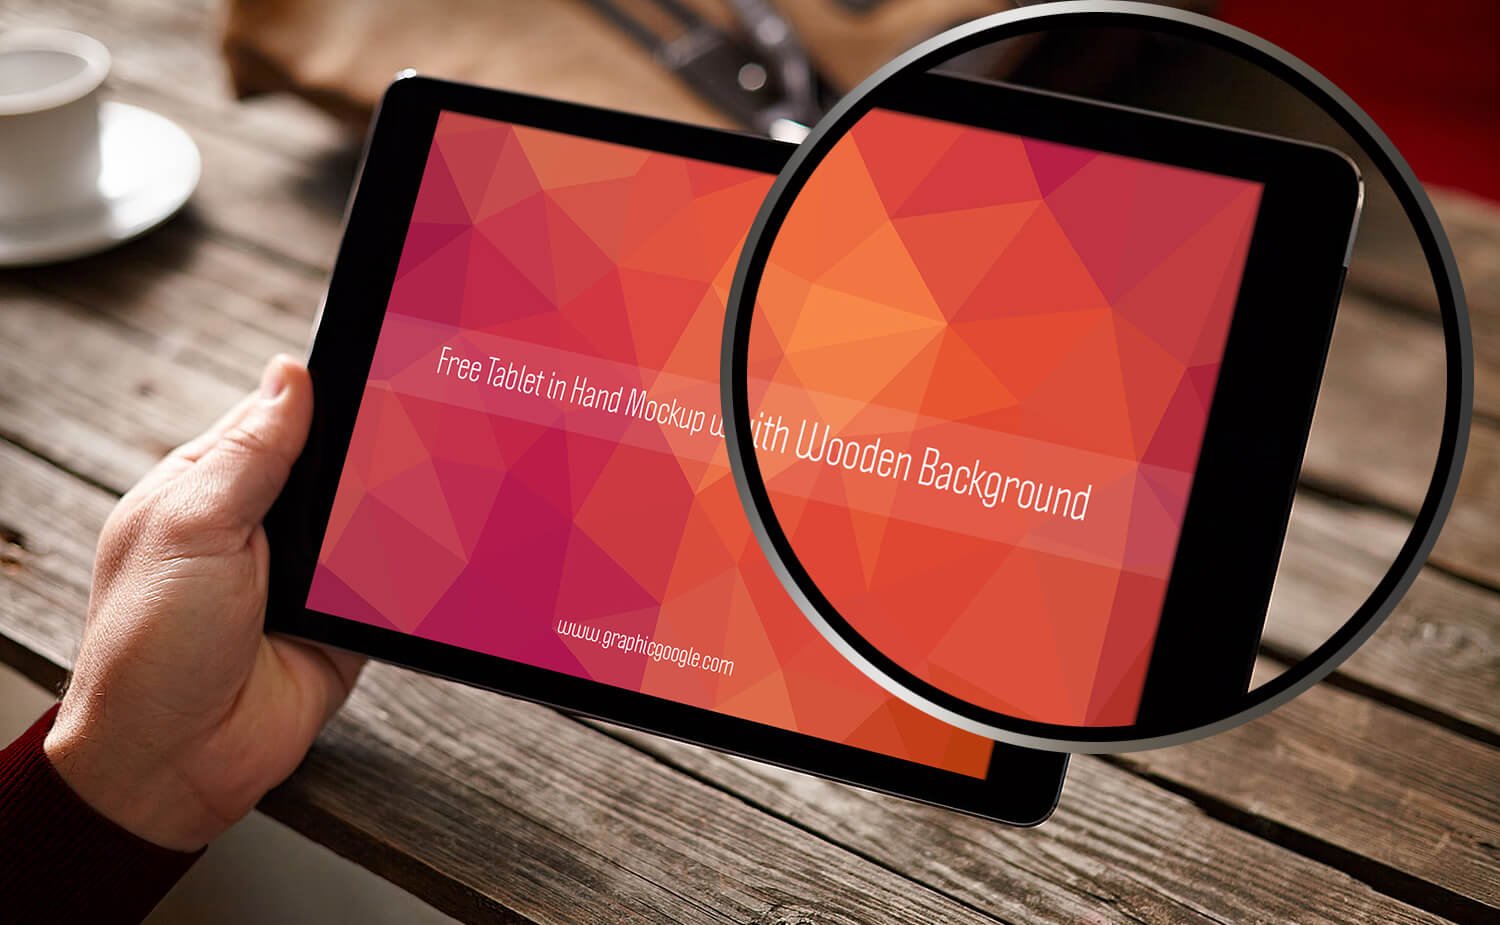 Tablet in Hand Mockup with Wooden Background Mockup PSD: